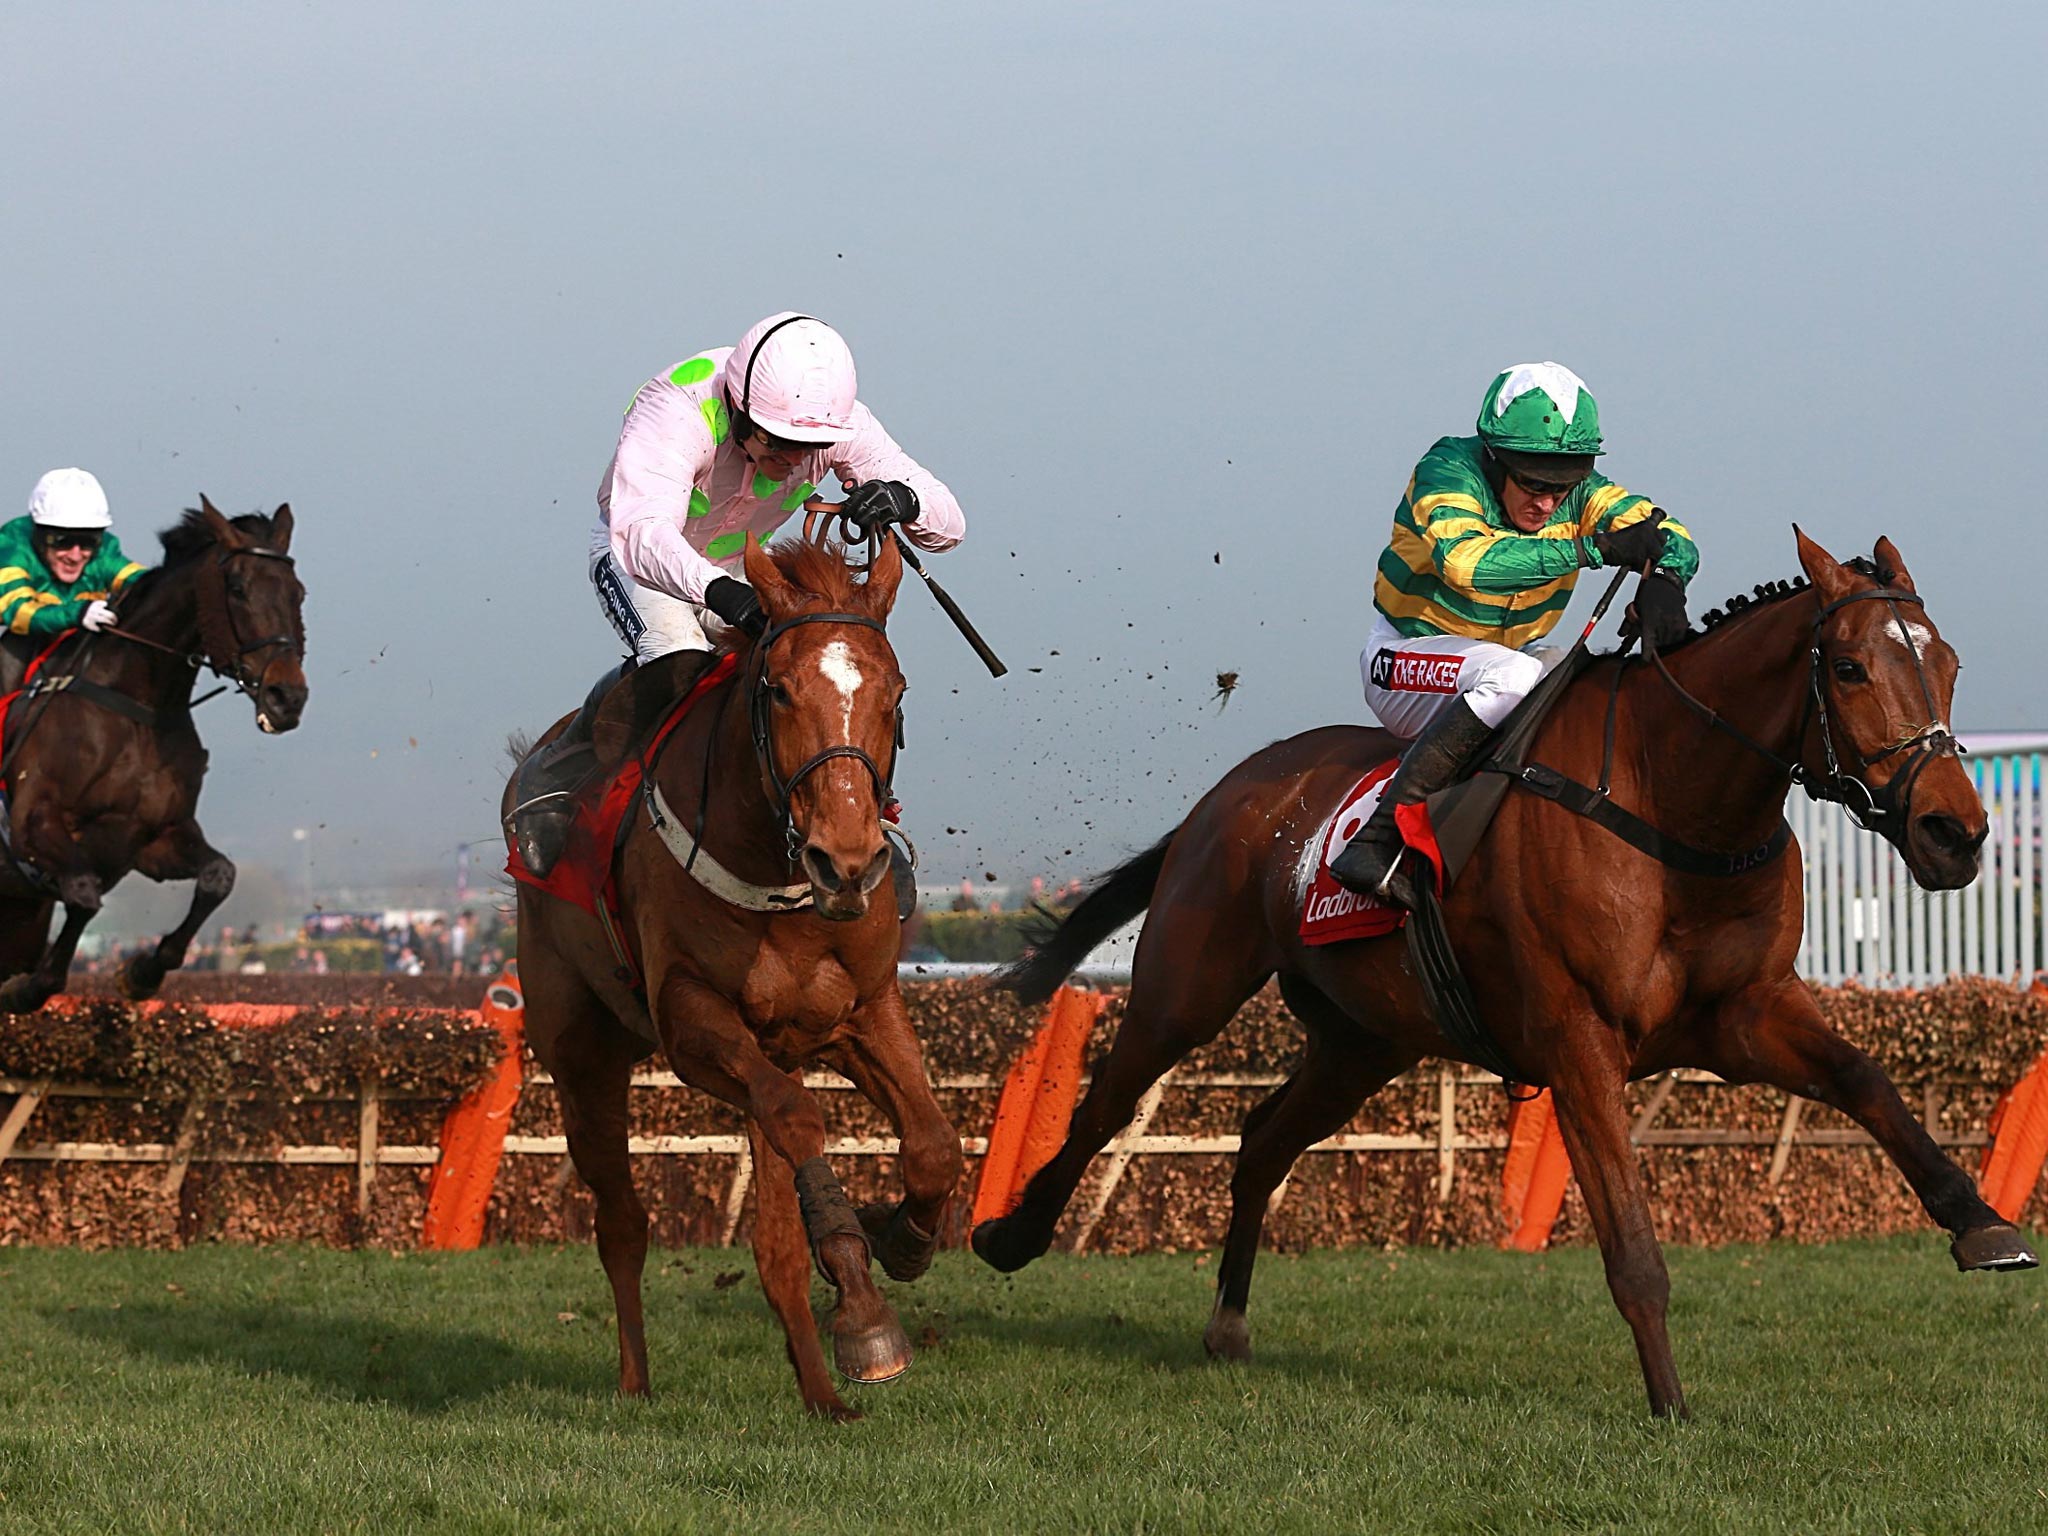 More Of That ridden by Barry Geraghty (right) before winning the
Ladbrokes World Hurdle ahead of Annie Power ridden by Ruby Walsh